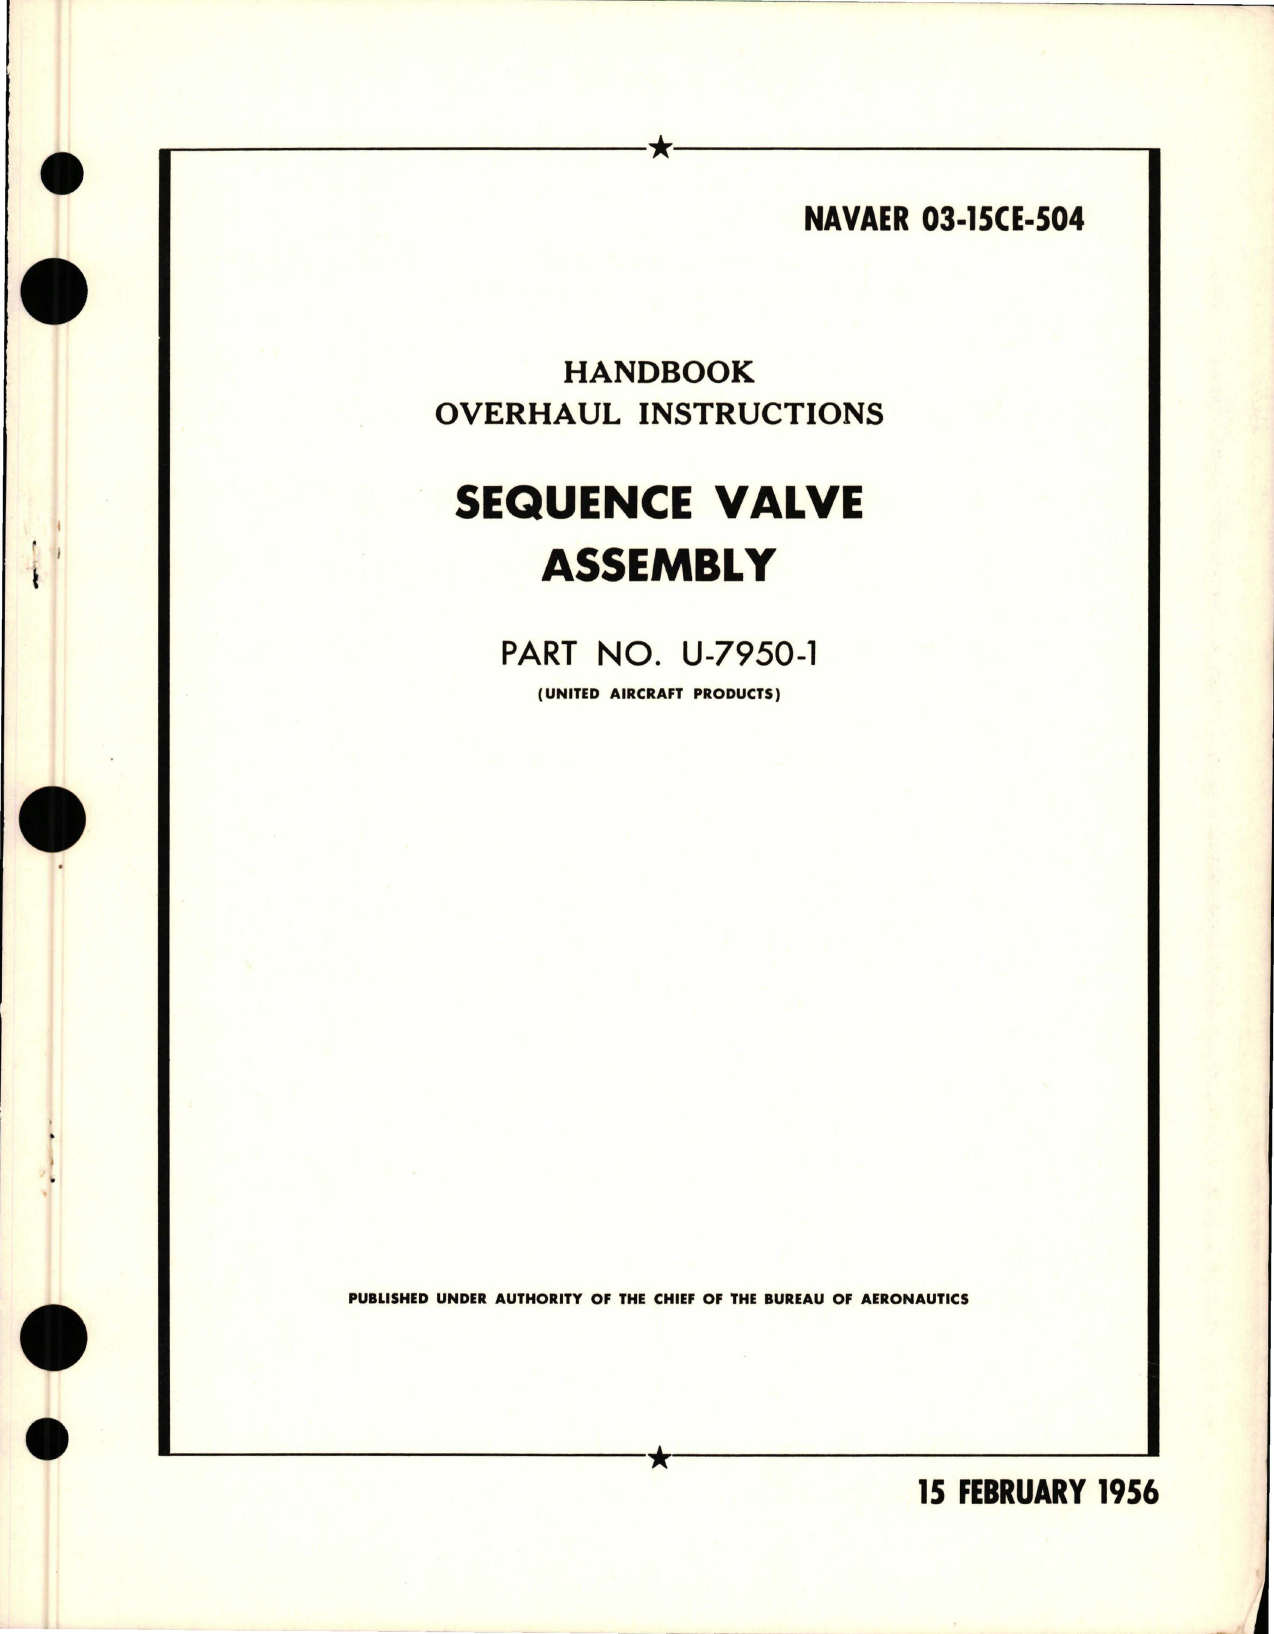 Sample page 1 from AirCorps Library document: Overhaul Instructions for Sequence Valve Assembly - Part U-7950-1